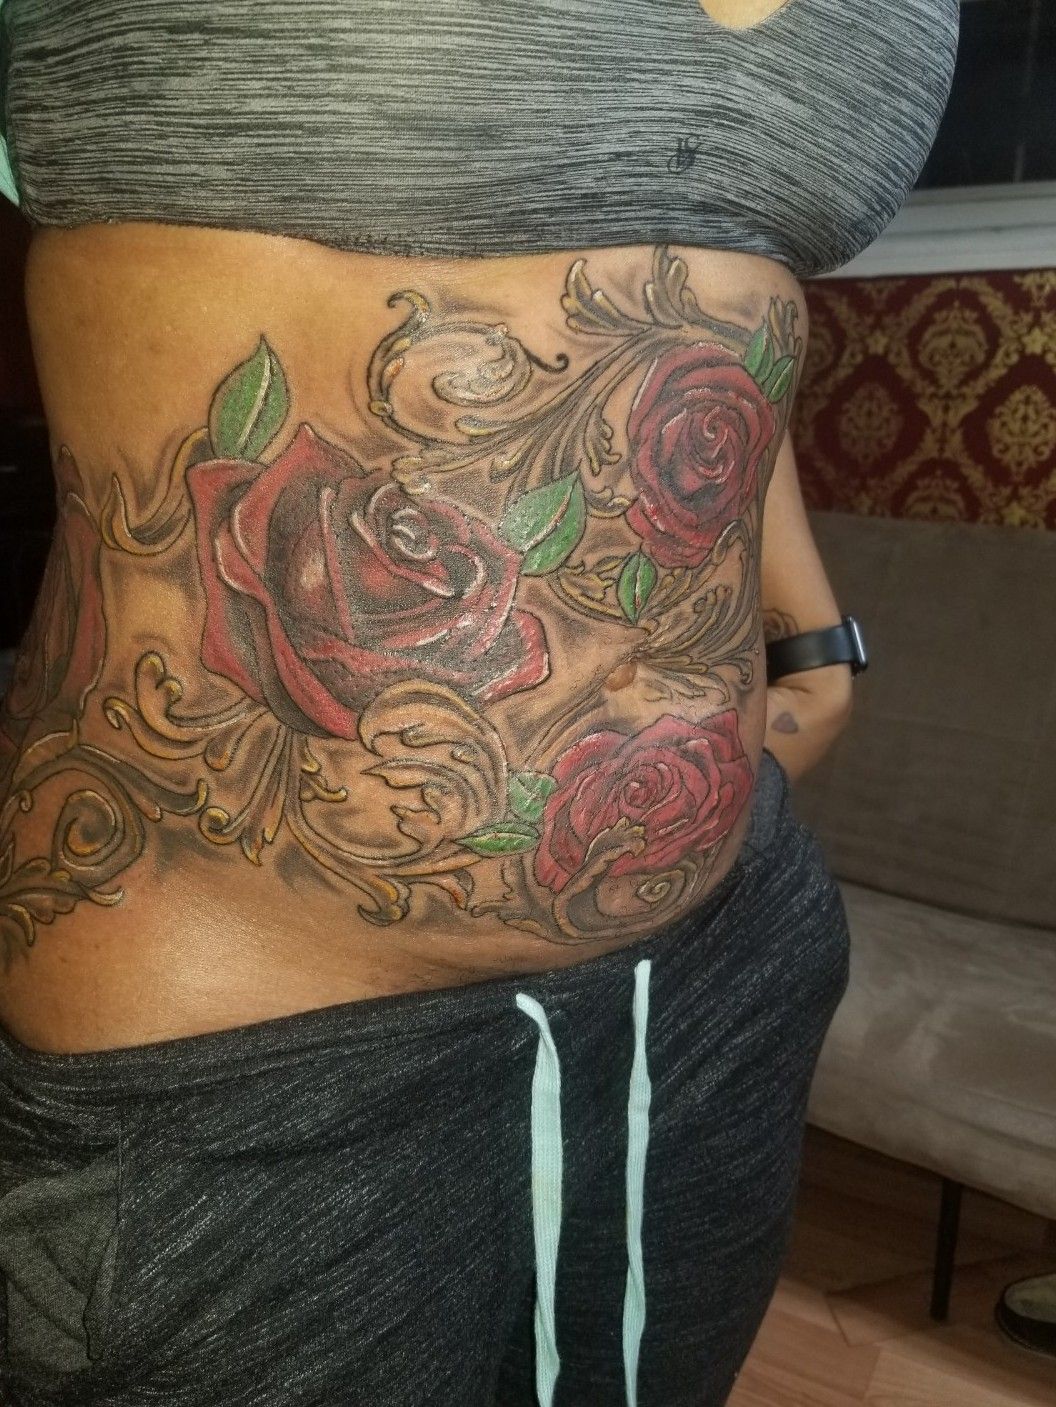 25 Awesome Stomach Tattoos To Cover Up Stretch Marks  EntertainmentMesh